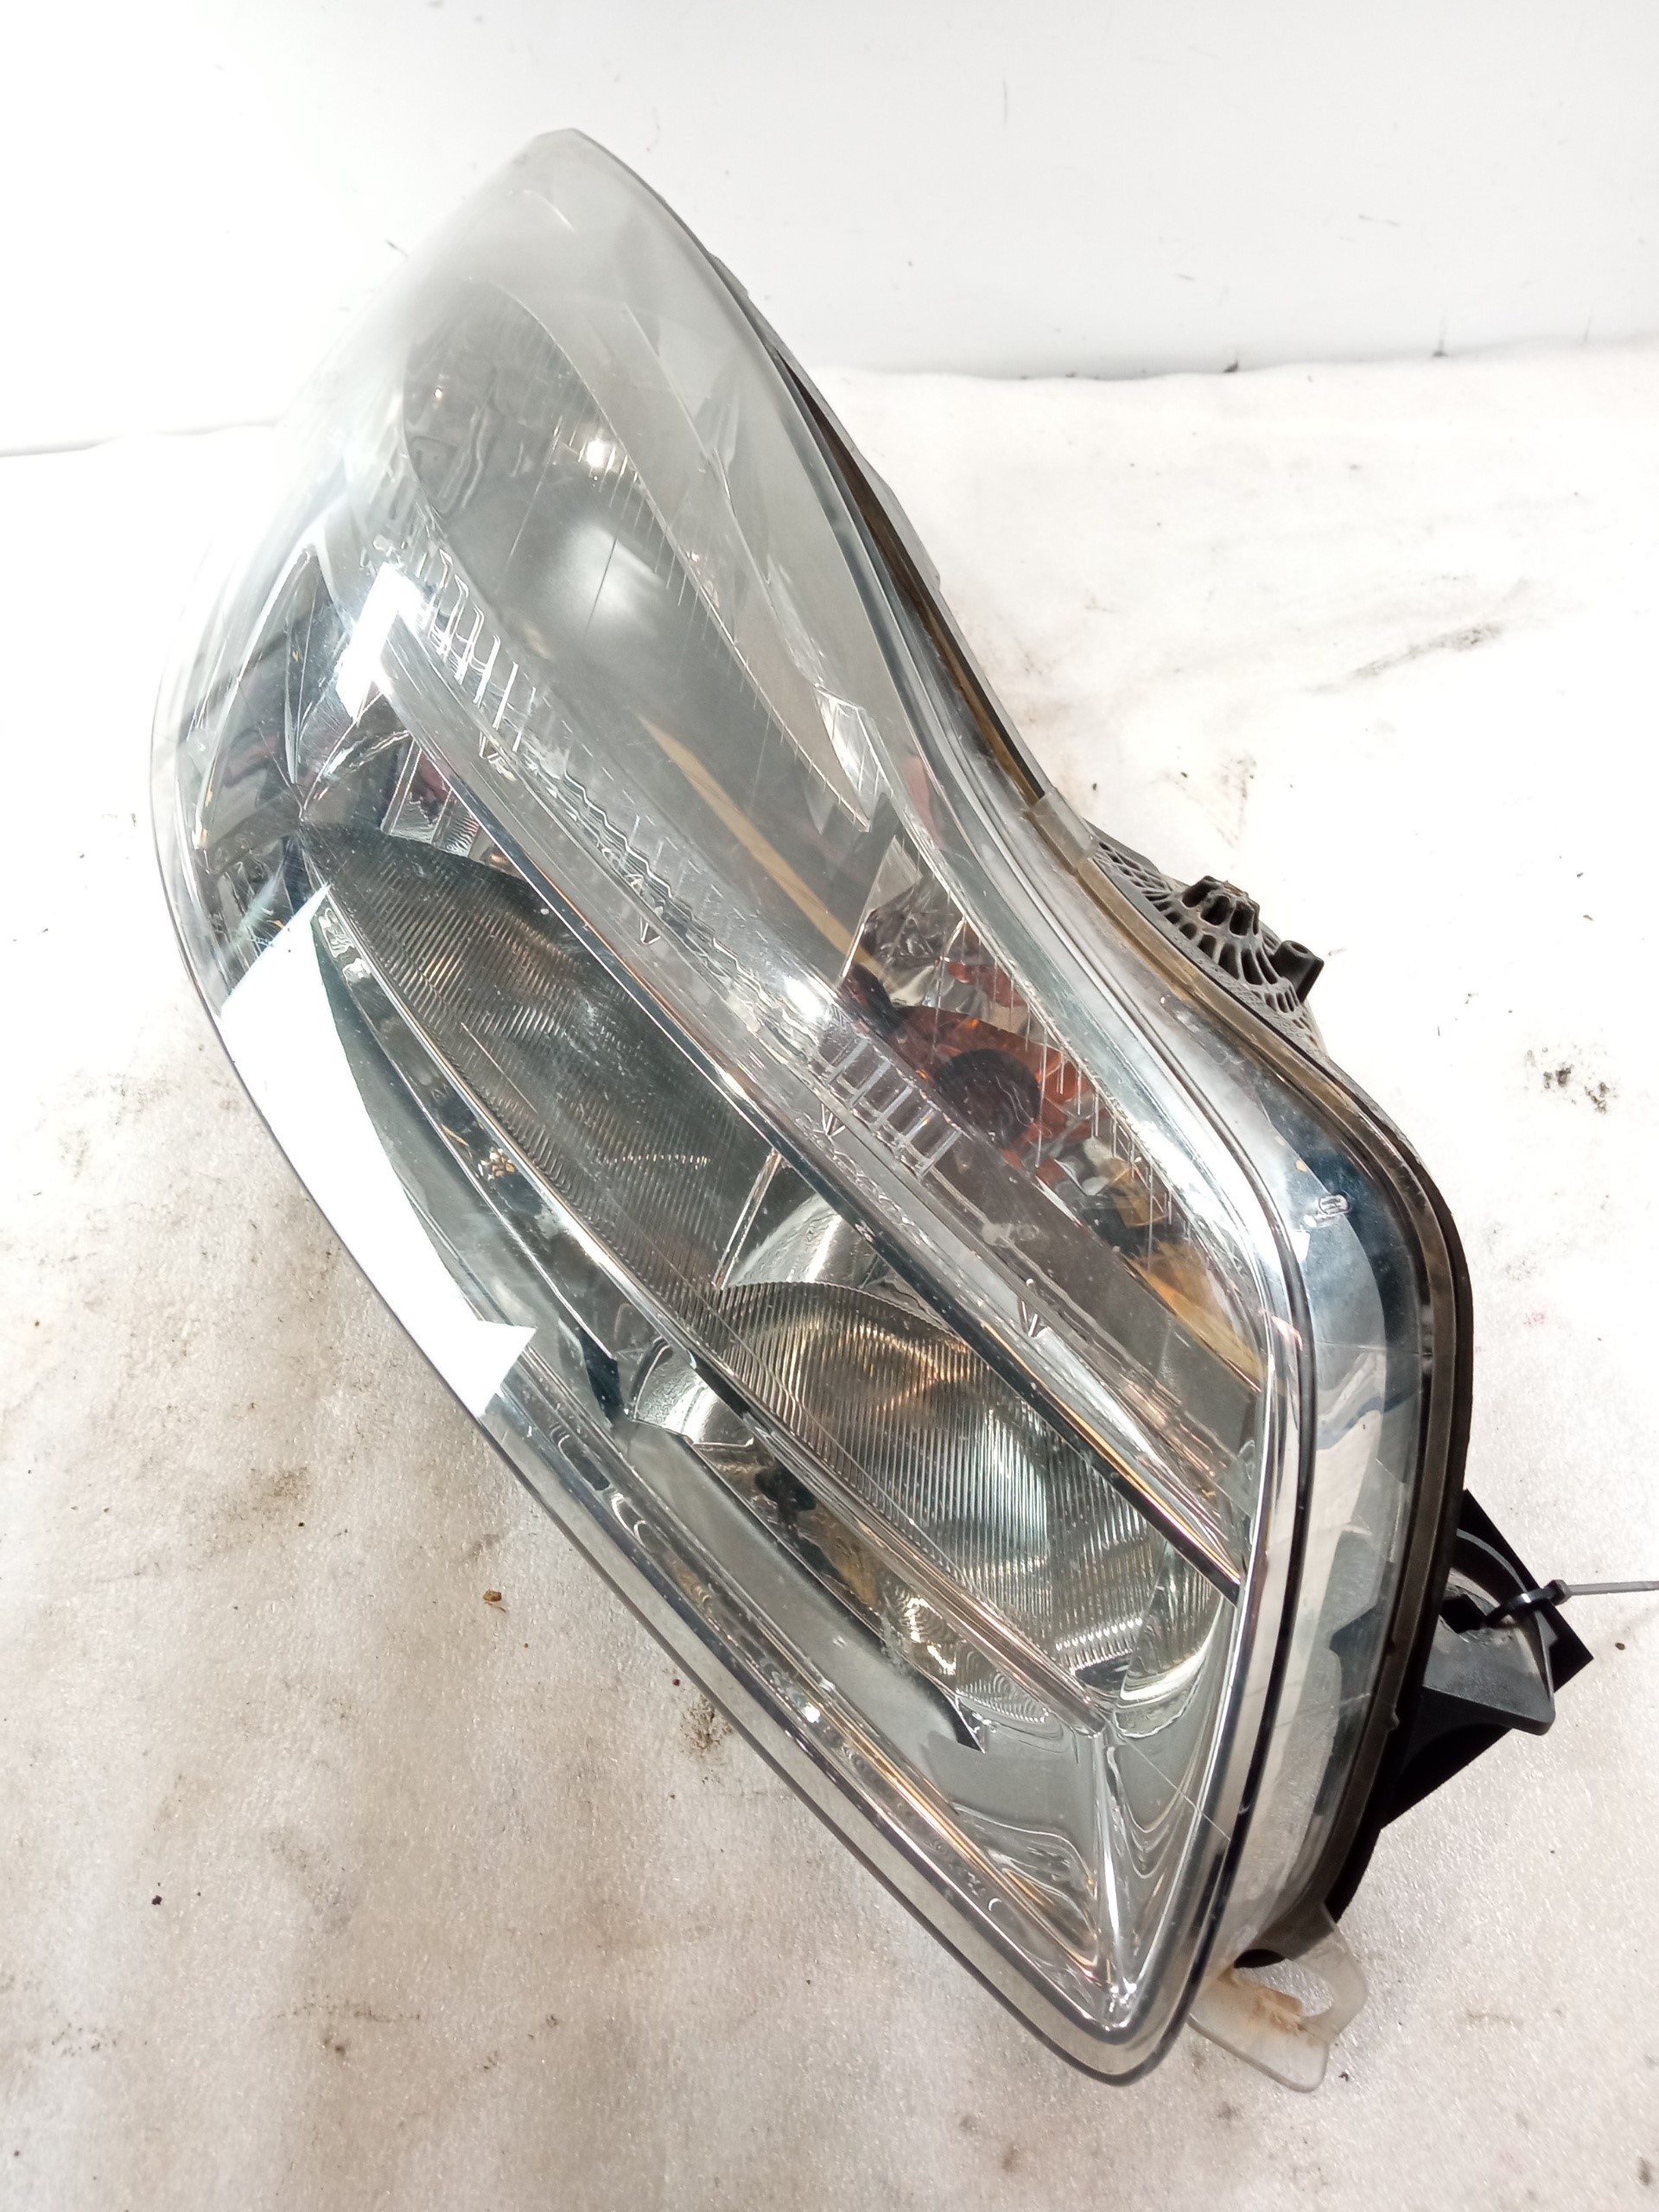 OPEL Insignia A (2008-2016) Front Right Headlight 1EJ00963002, 9PINES 25220276